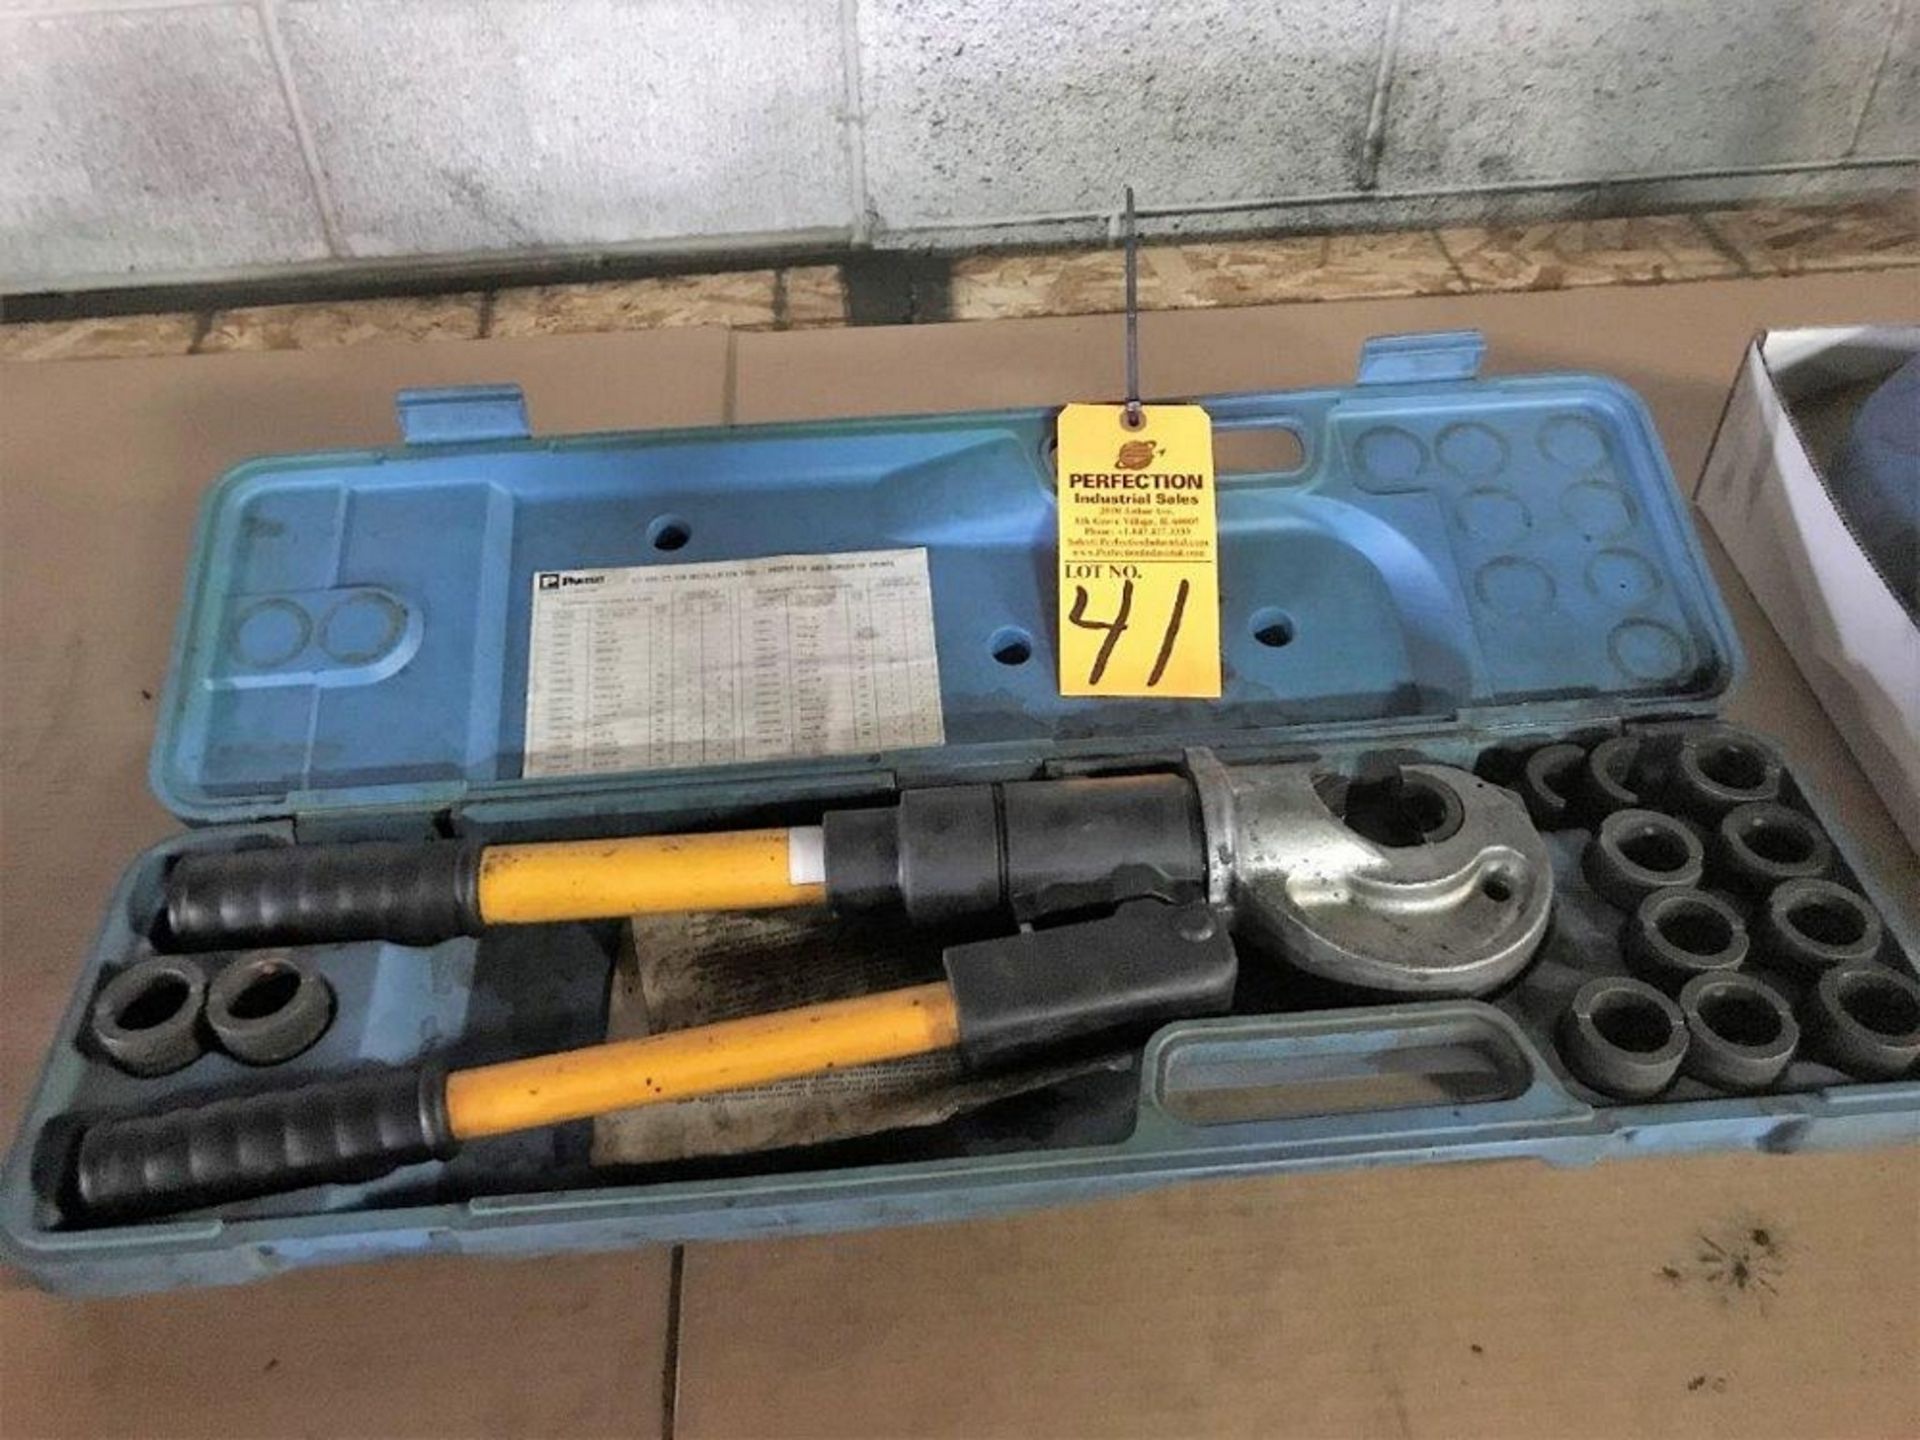 Panduit Ct-920 Hydraulic Crimping Tool with Dies